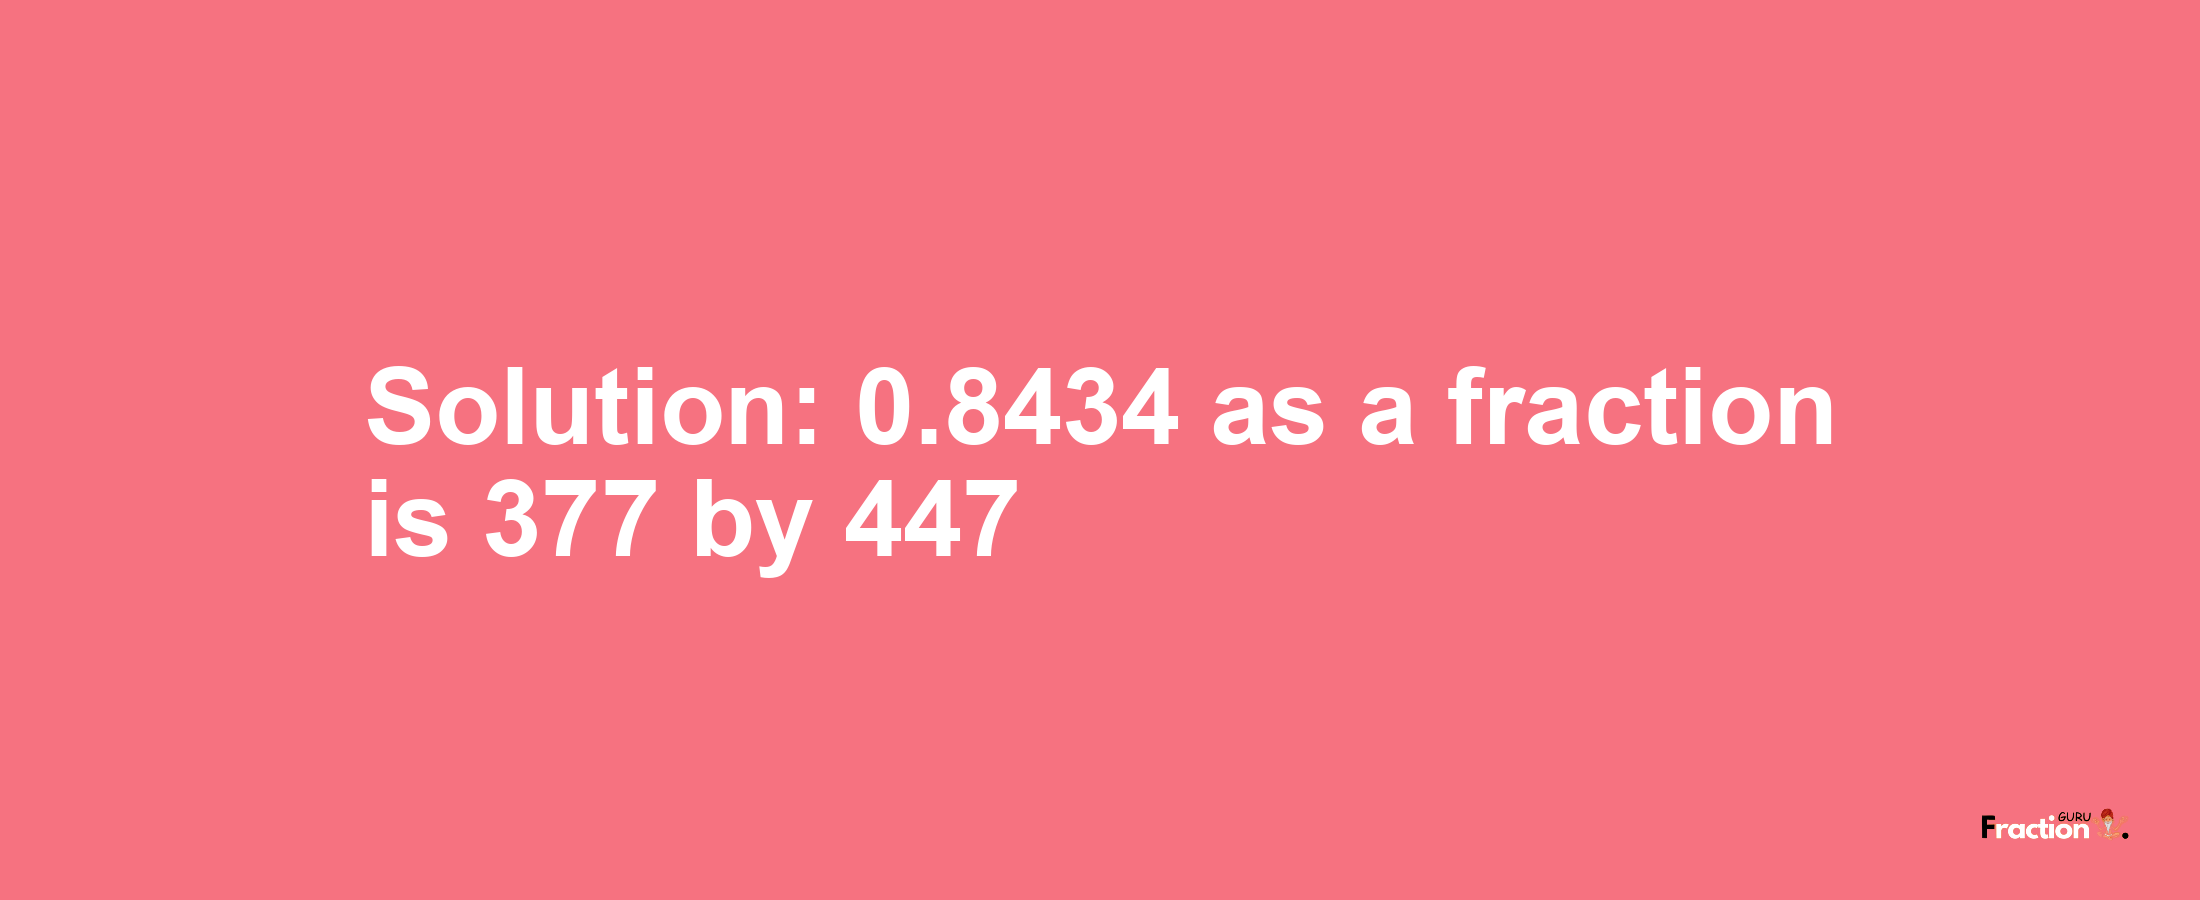 Solution:0.8434 as a fraction is 377/447